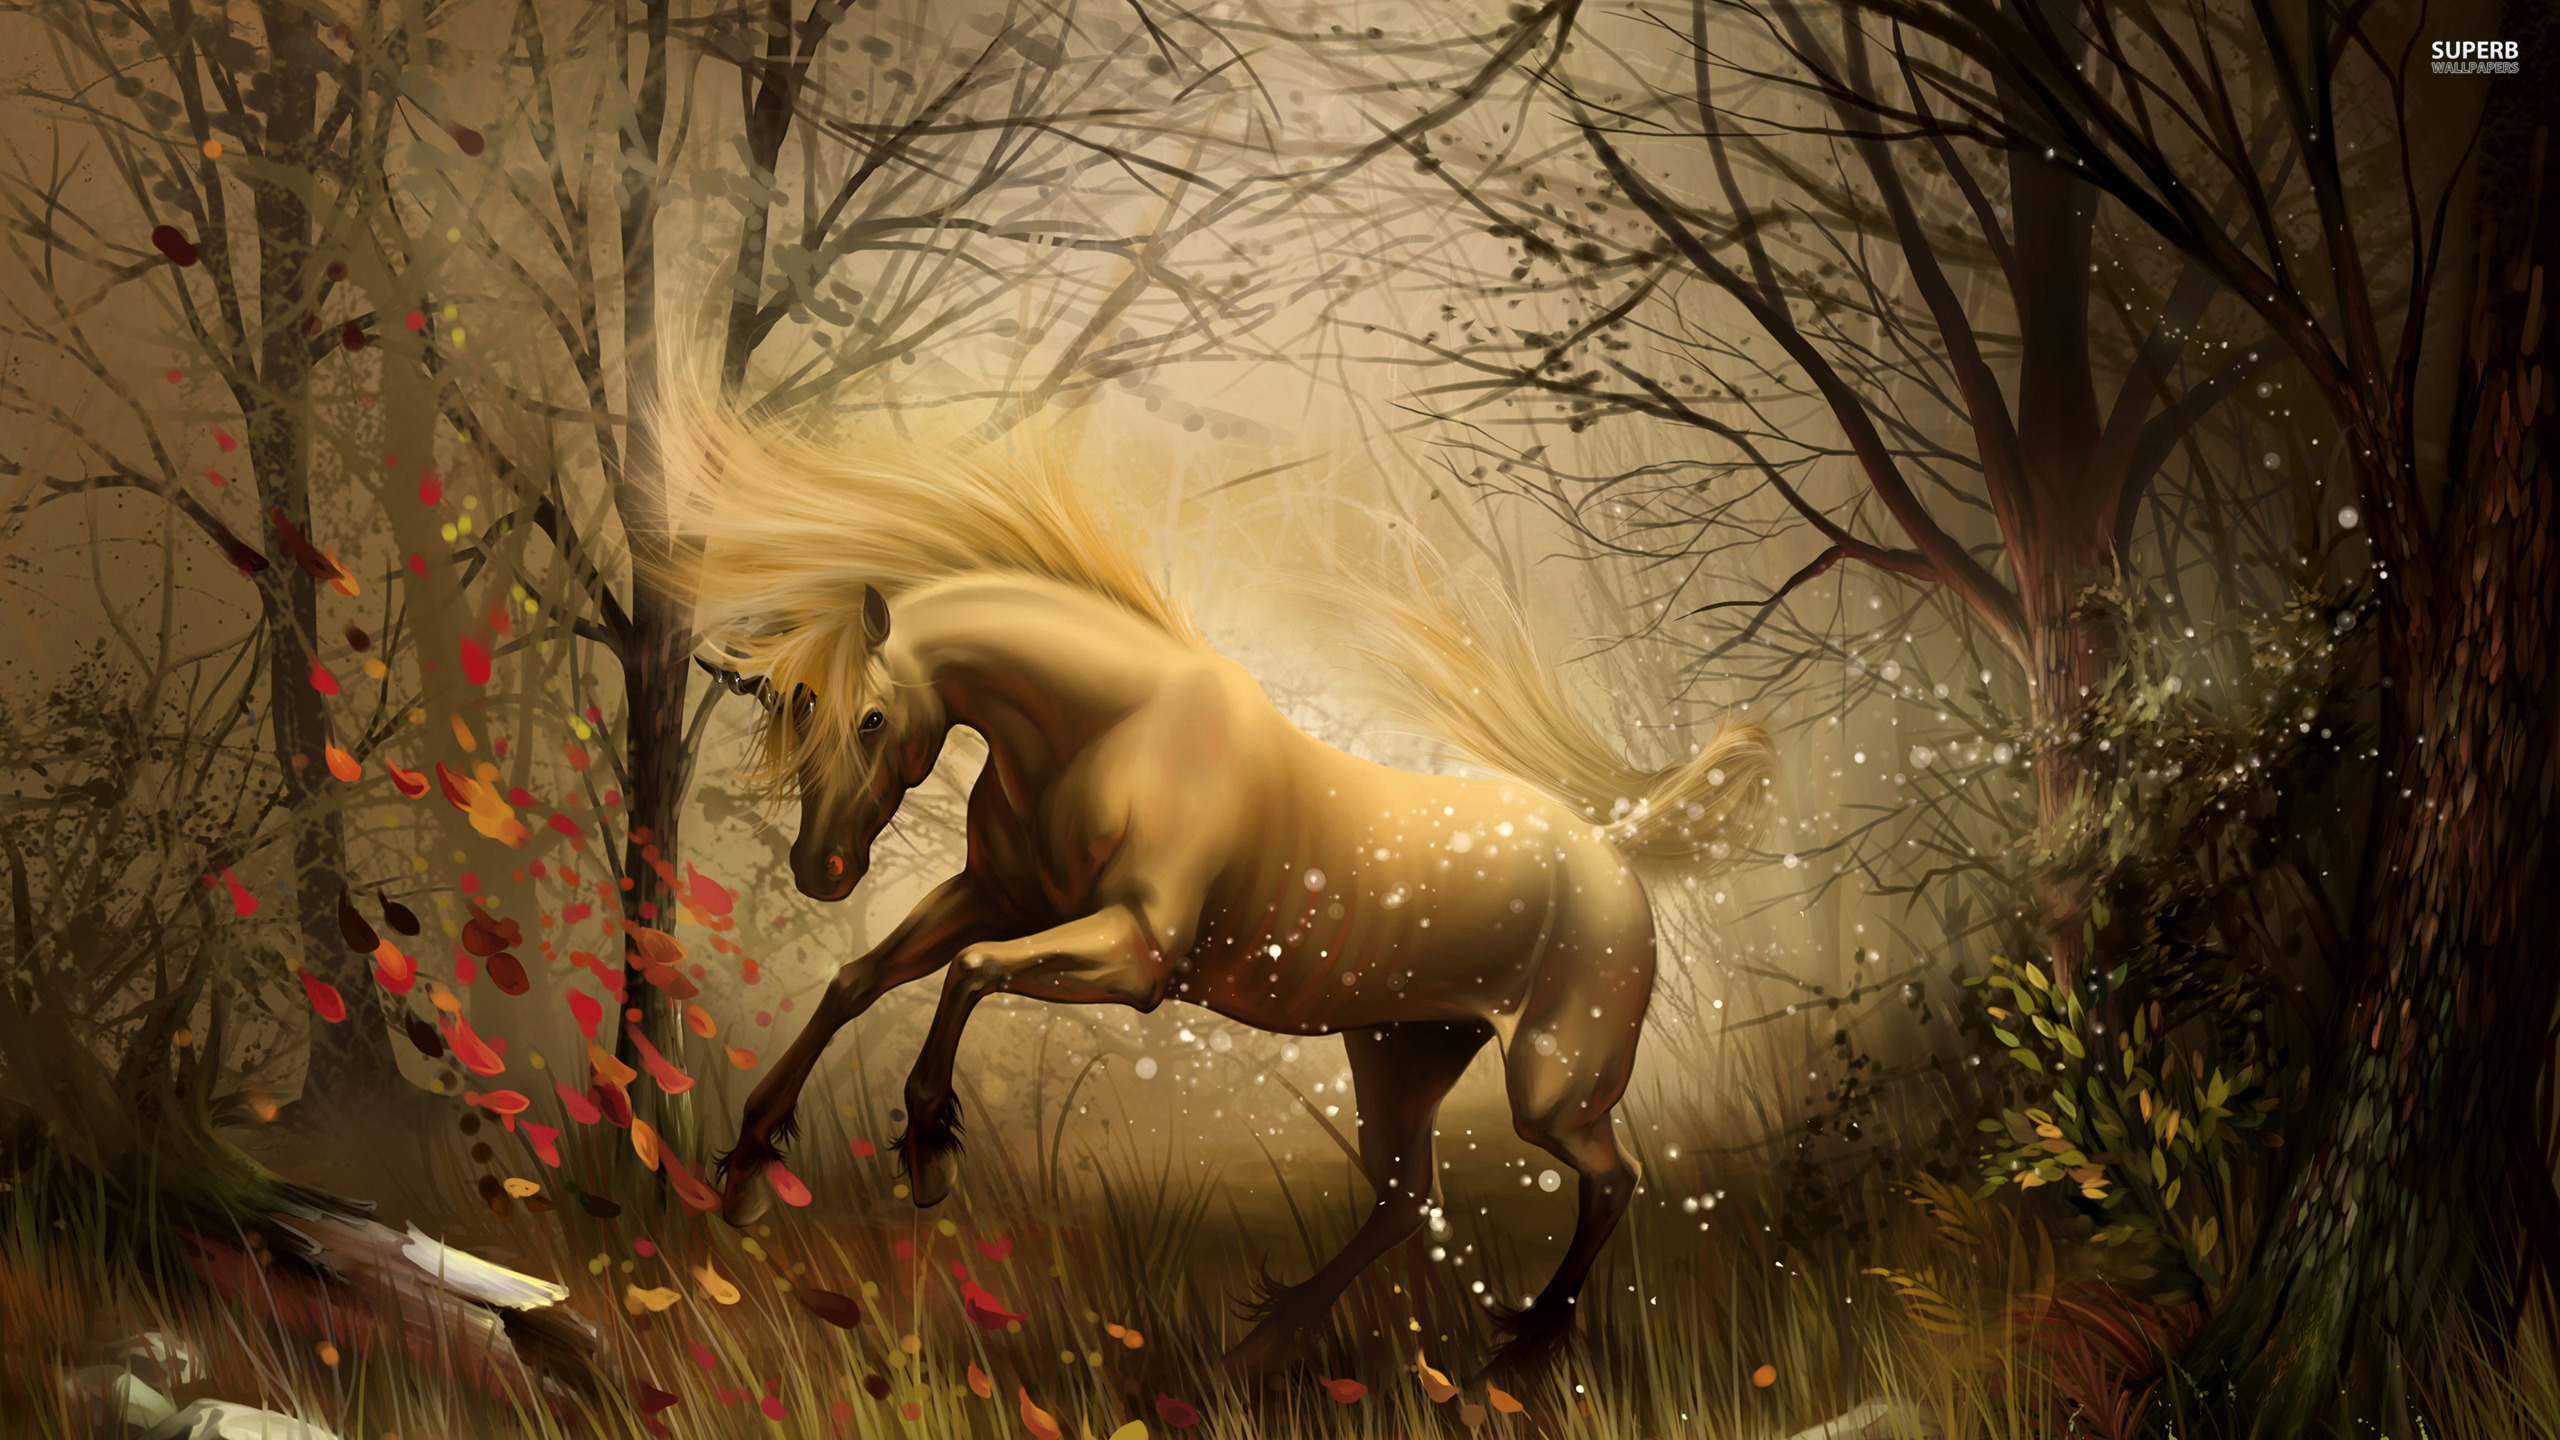 Unicorn In Enchanted Forest - HD Wallpaper 